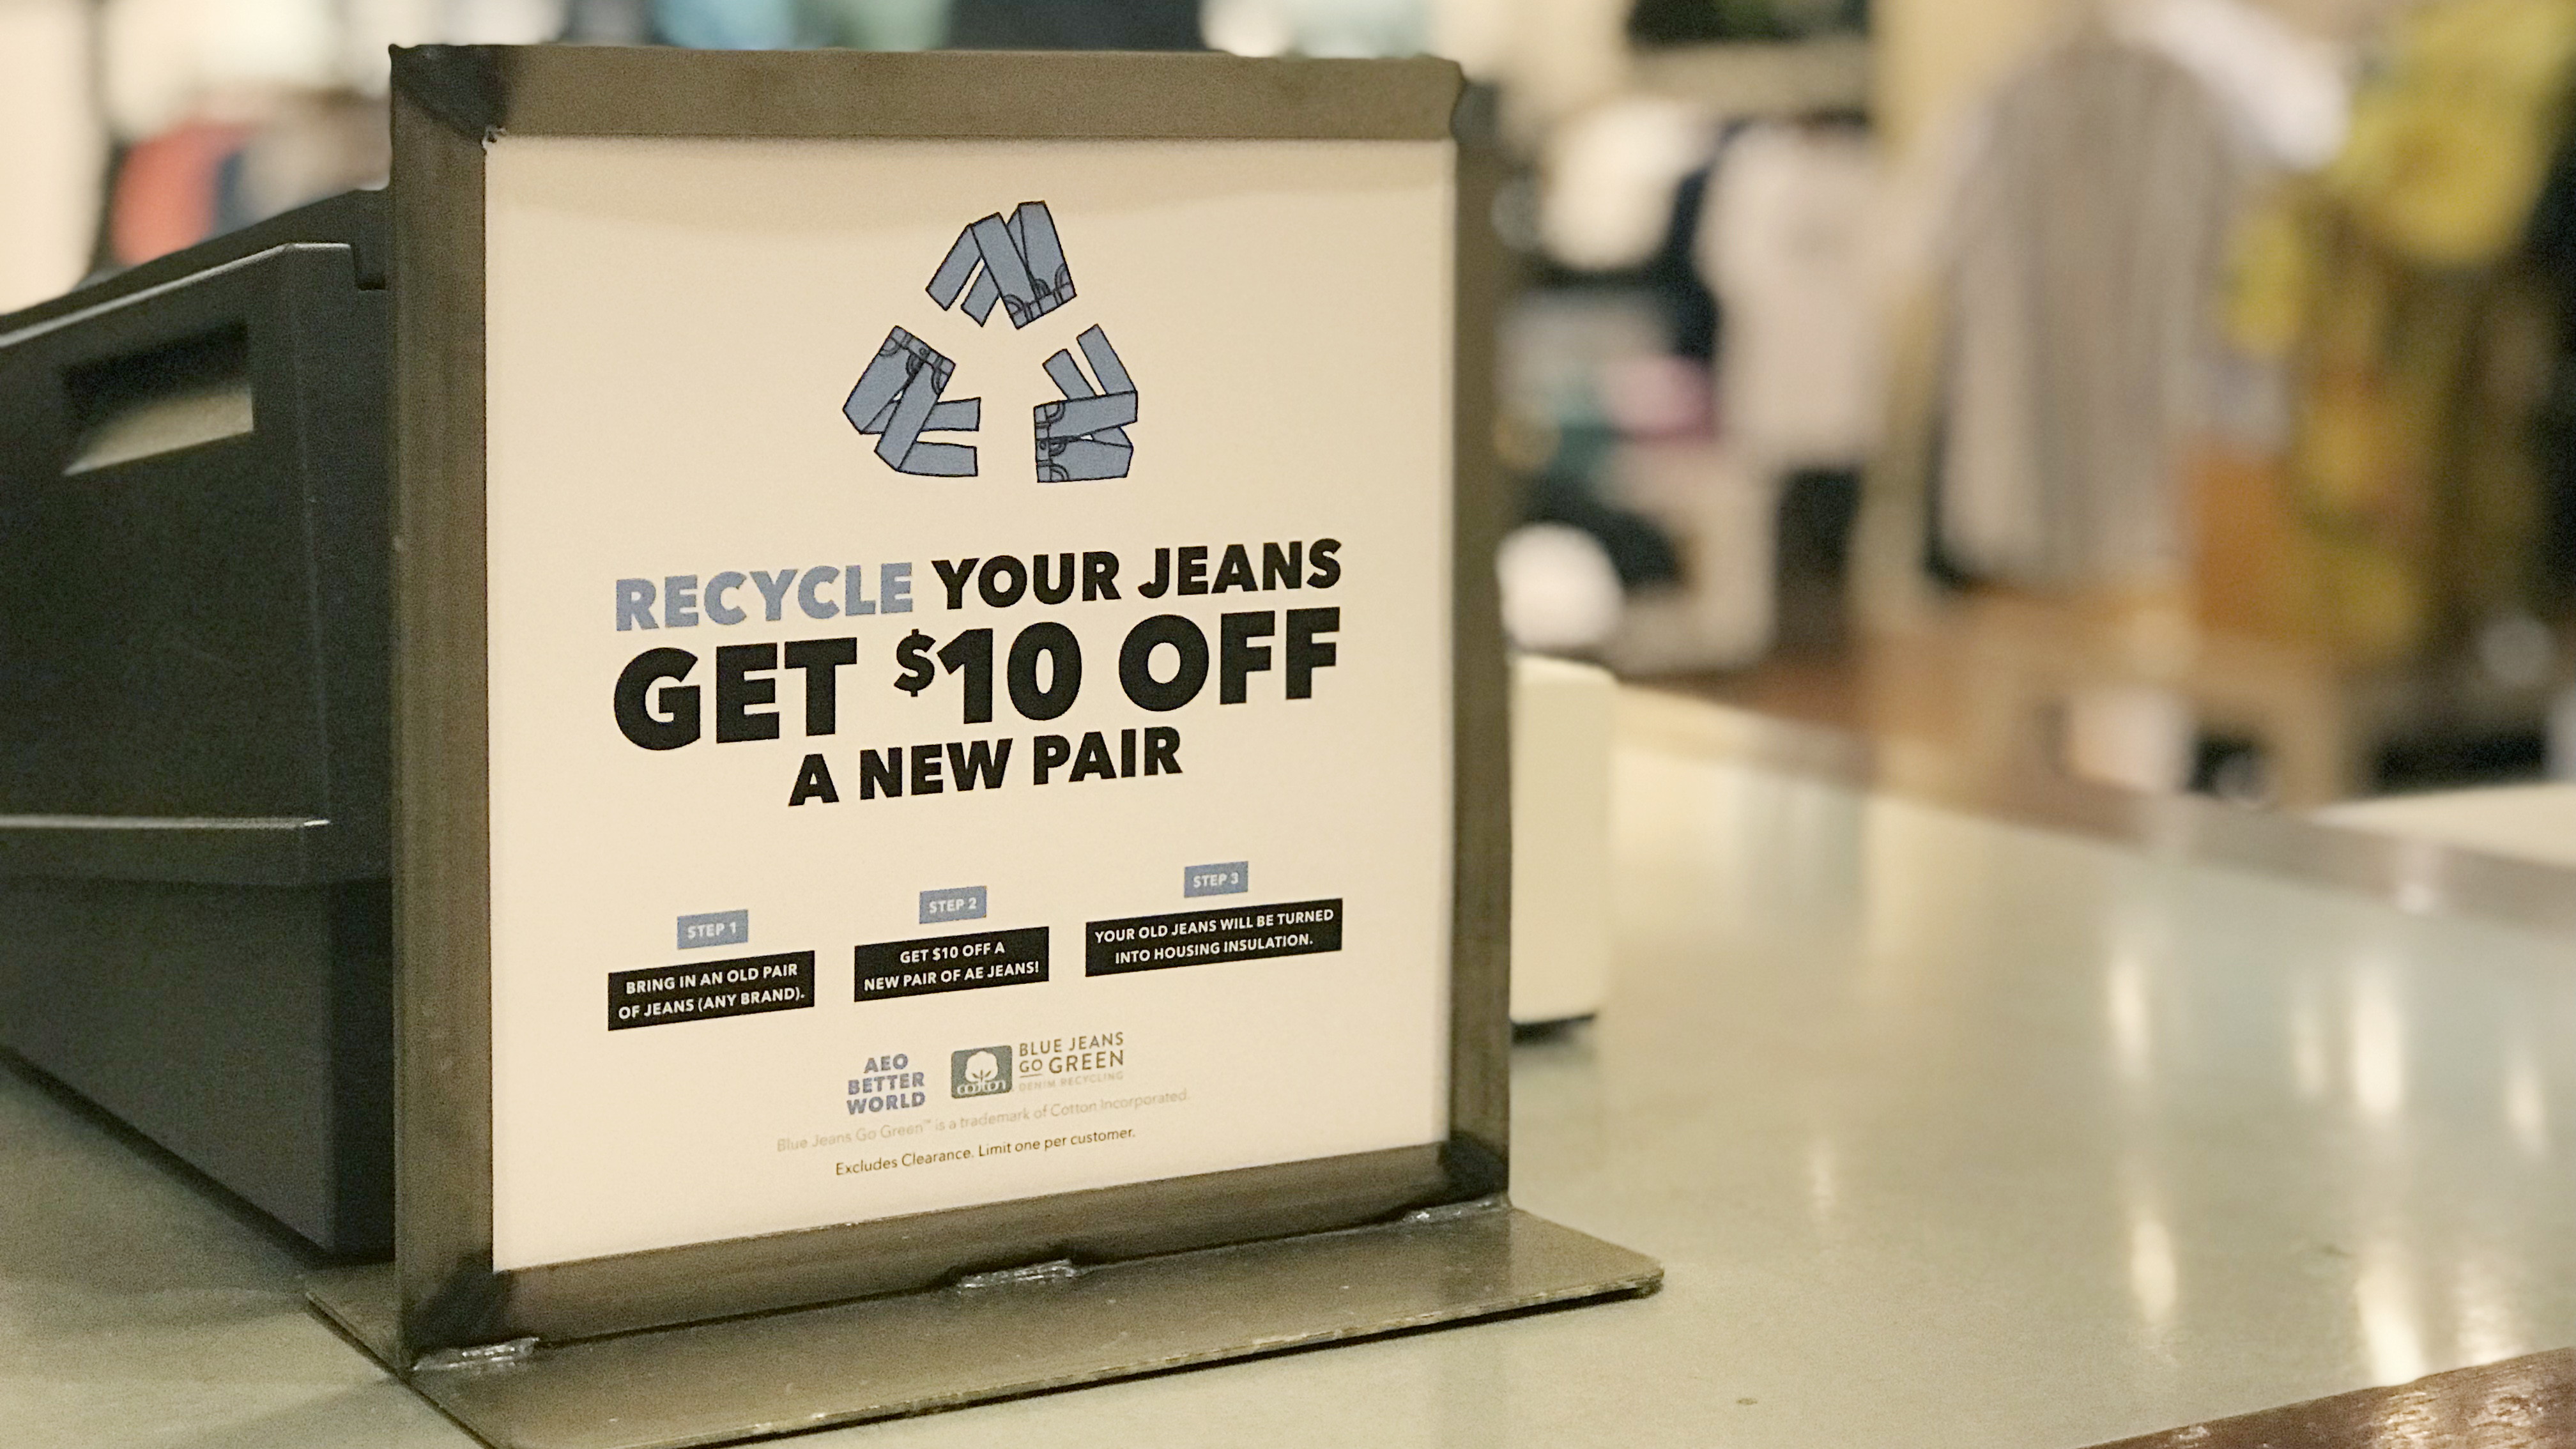 How to Recycle Jeans for Money - The Krazy Coupon Lady